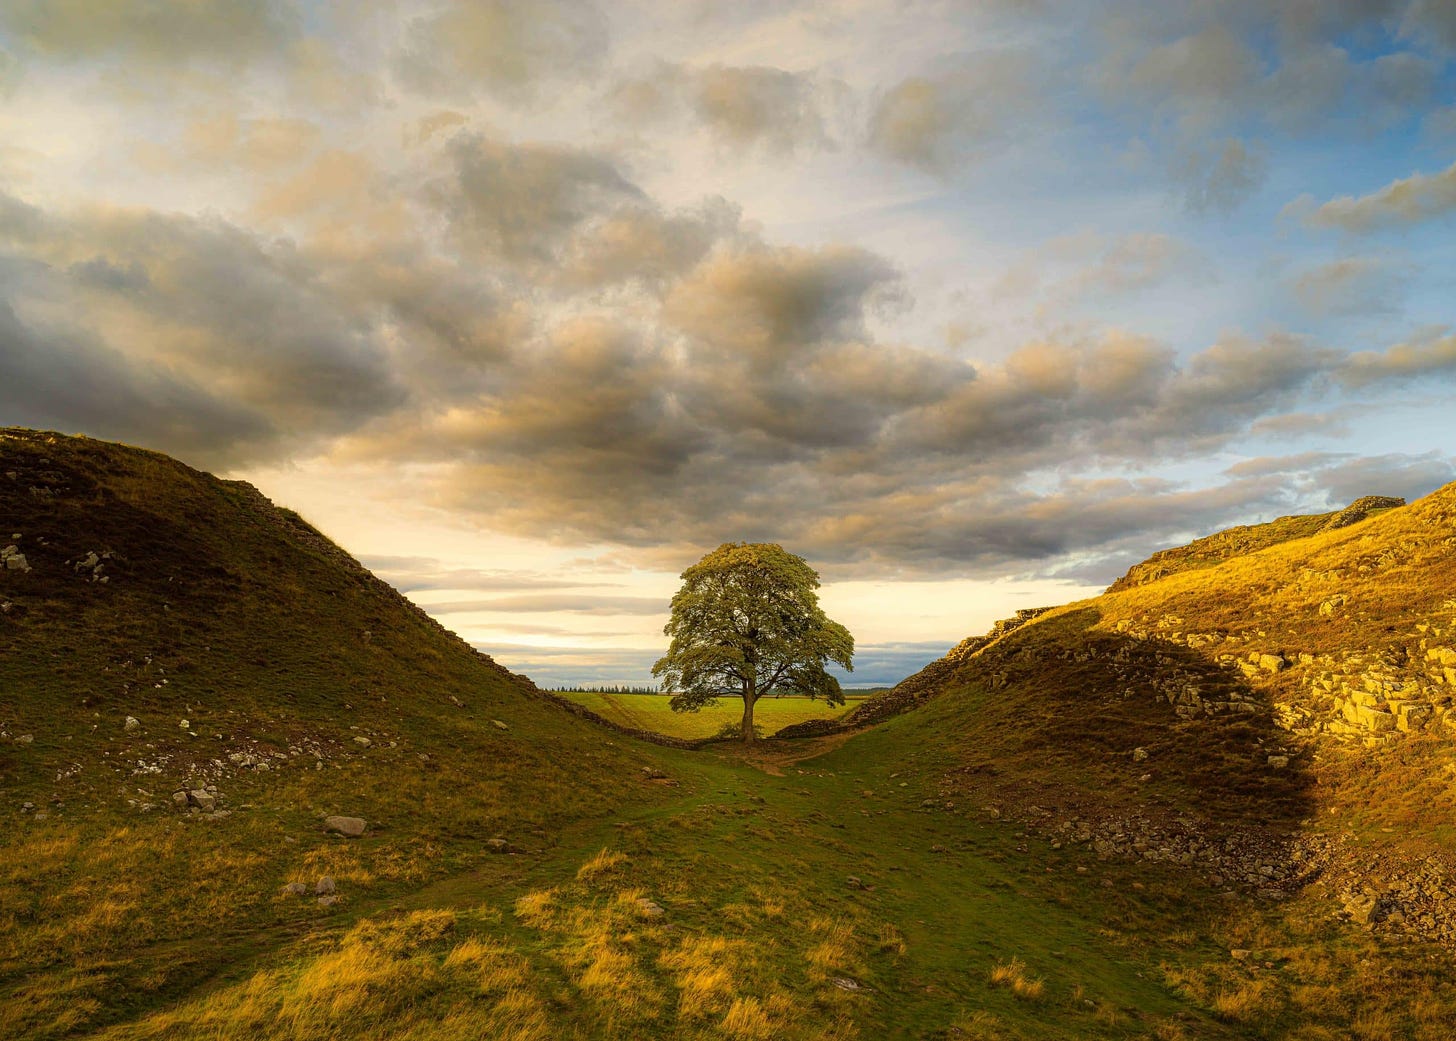 Sycamore tree in a dip between two hills, with a cloudy sky in the background